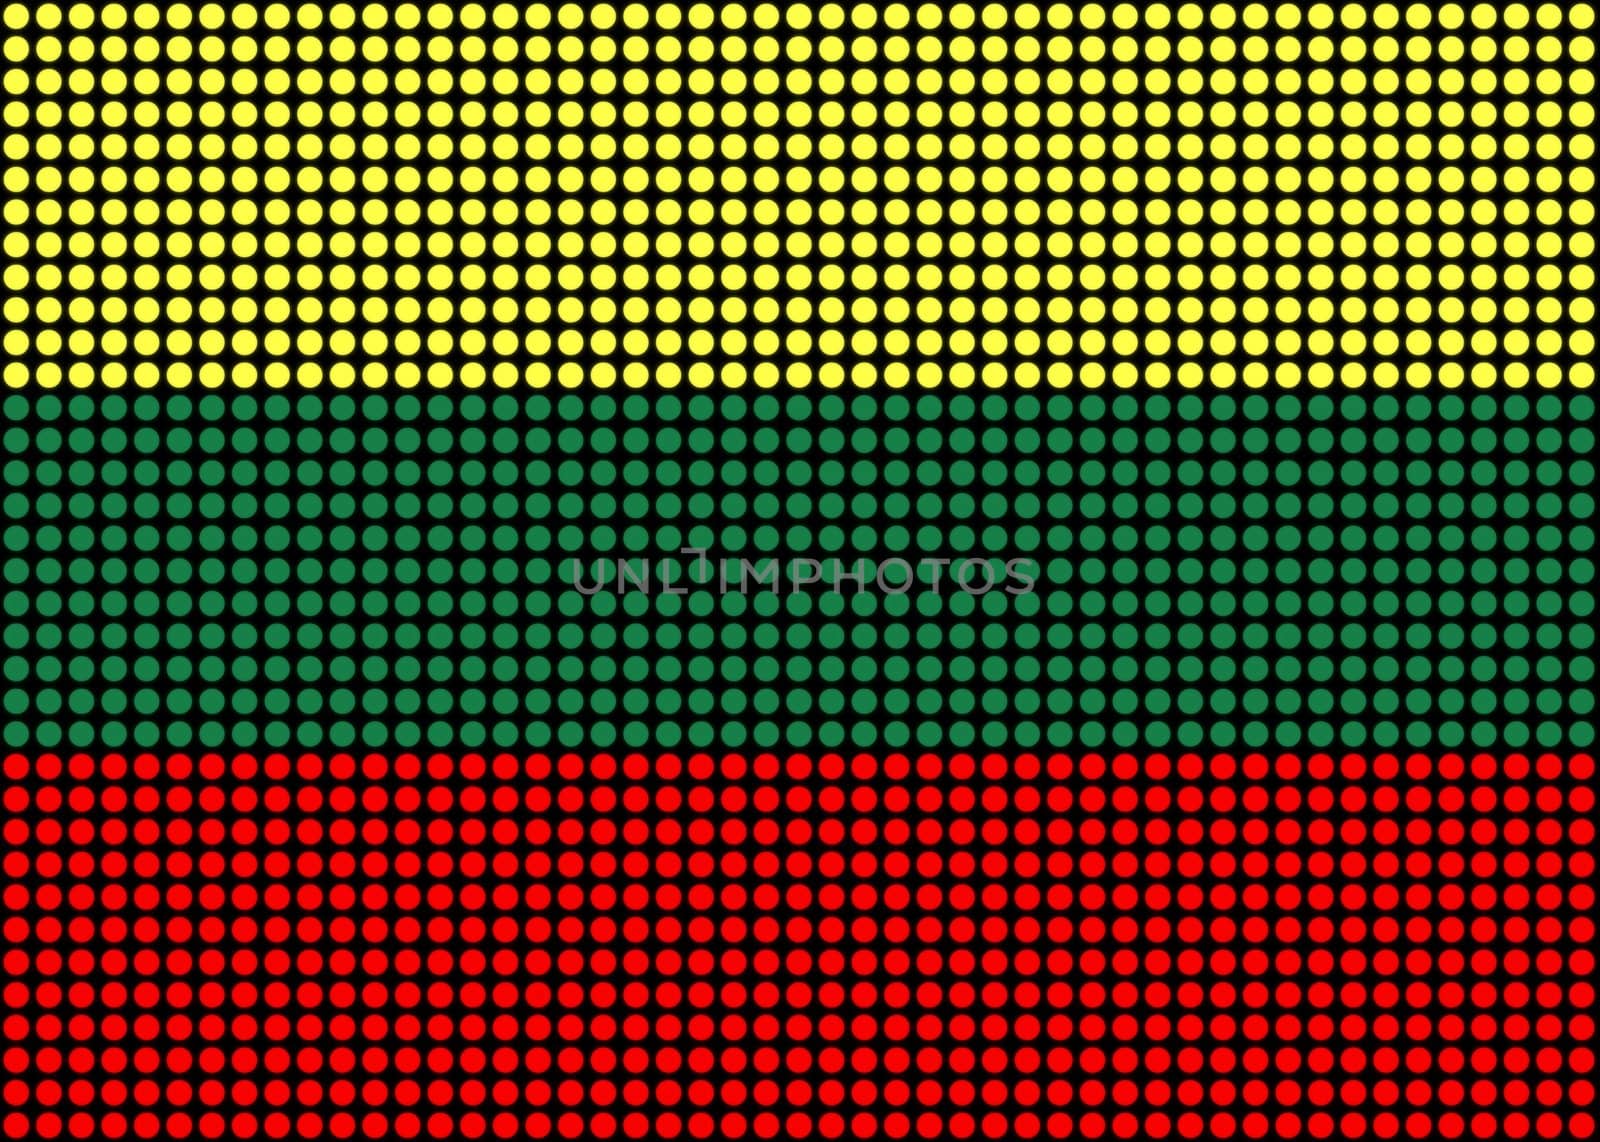 Illustration of a Lithuania Flag made of dots